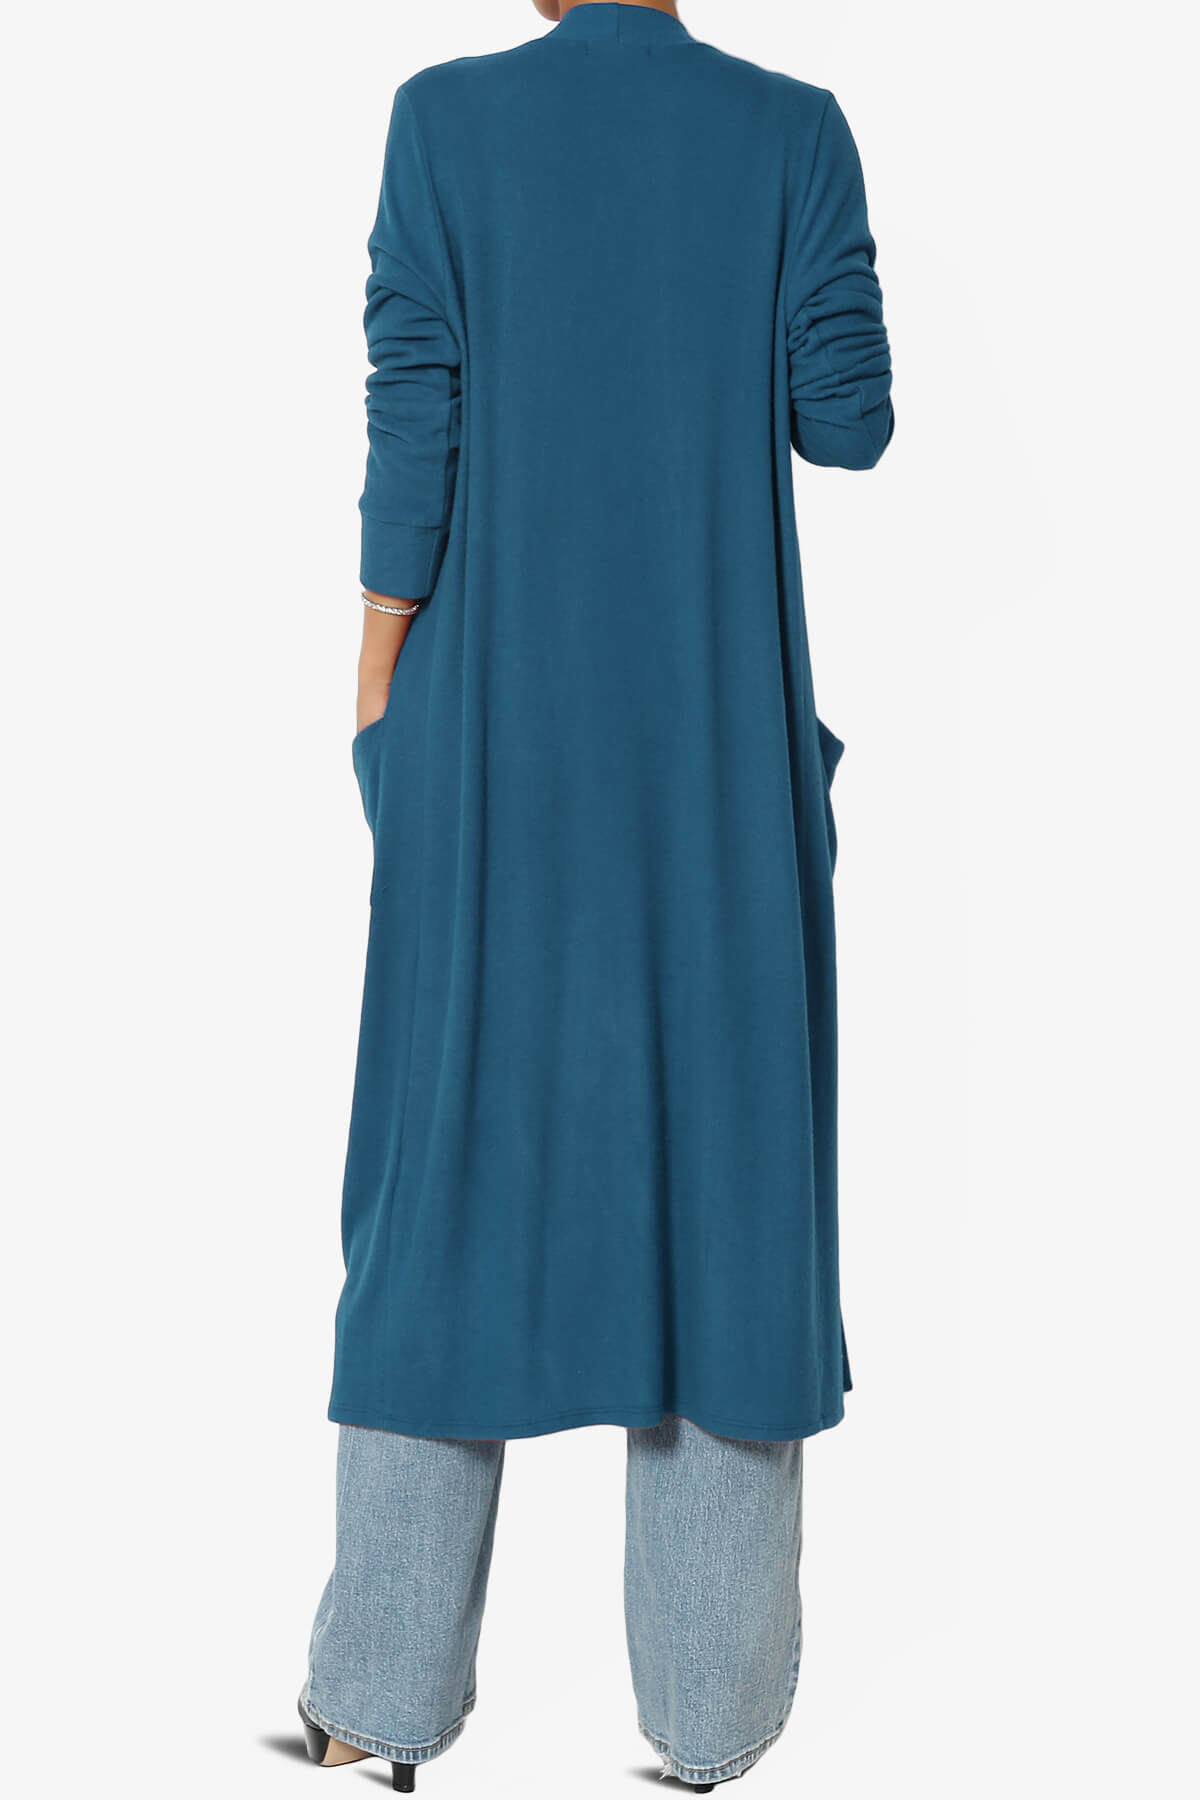 Noelle Extra Long Duster Knit Cardigan TEAL_2